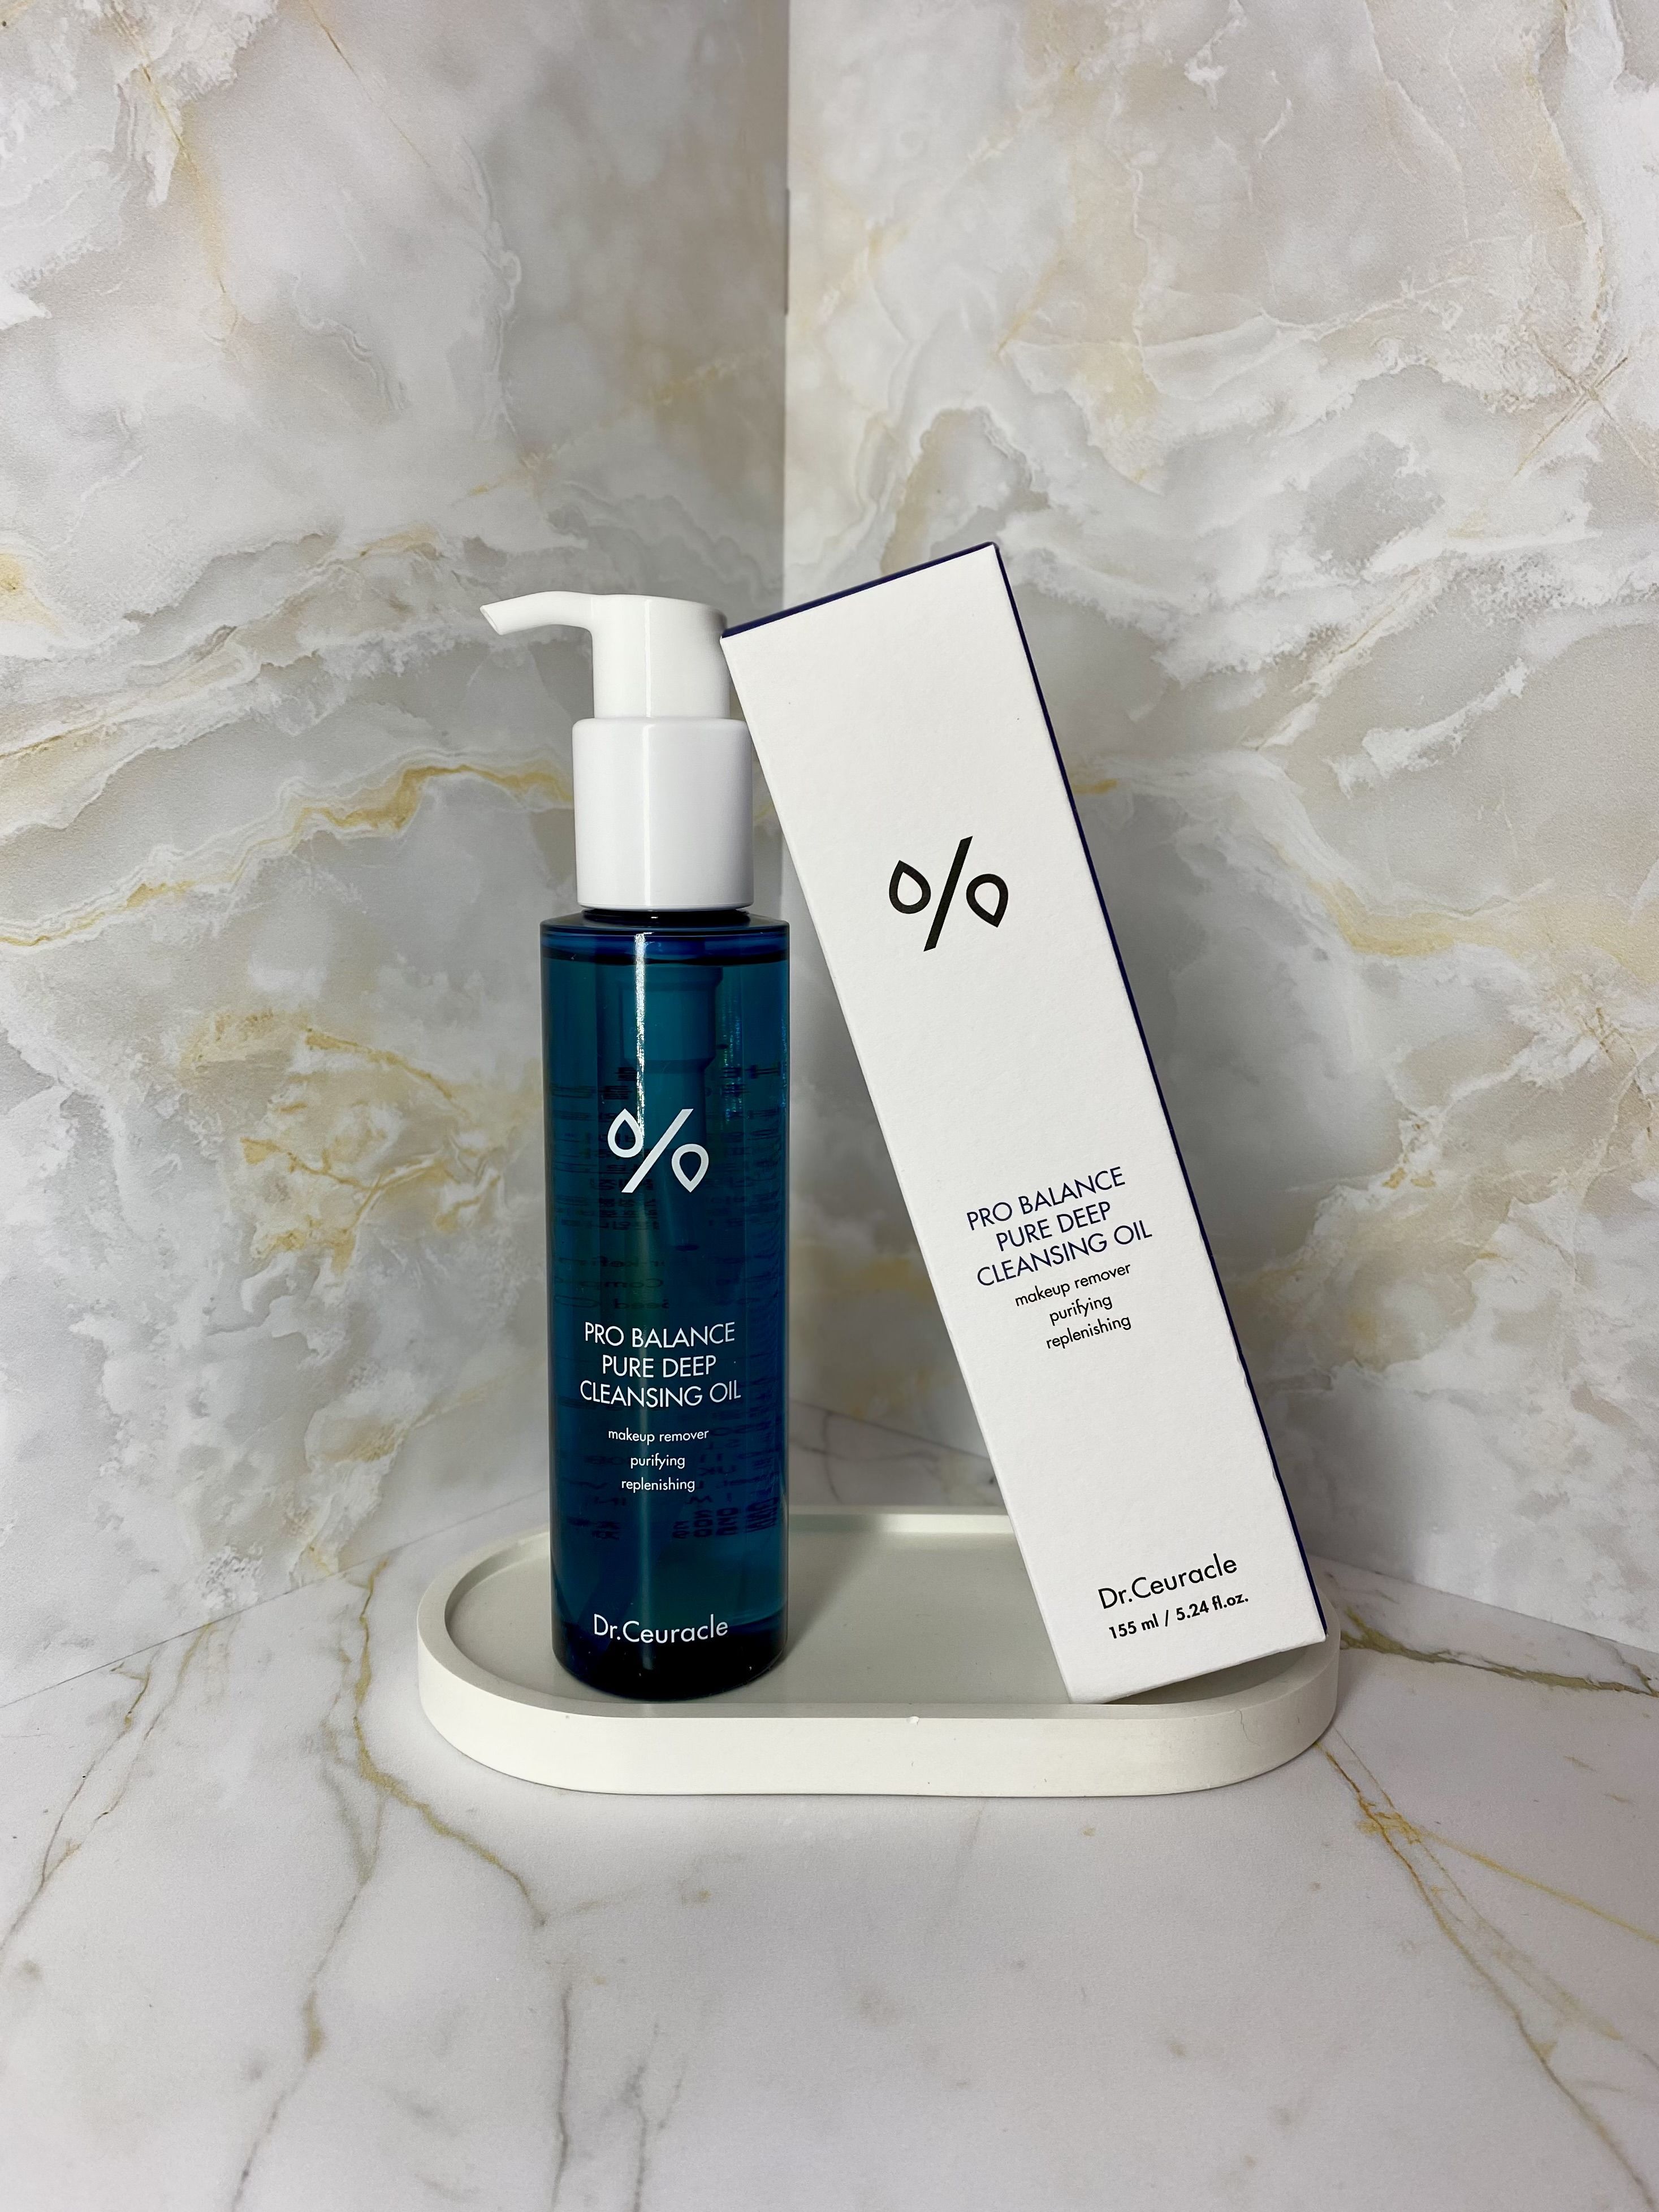 Pro Balance Pure Cleansing Oil. Dr.ceuracle Pro Balance Pure Deep Cleansinng Oil 155 ml.